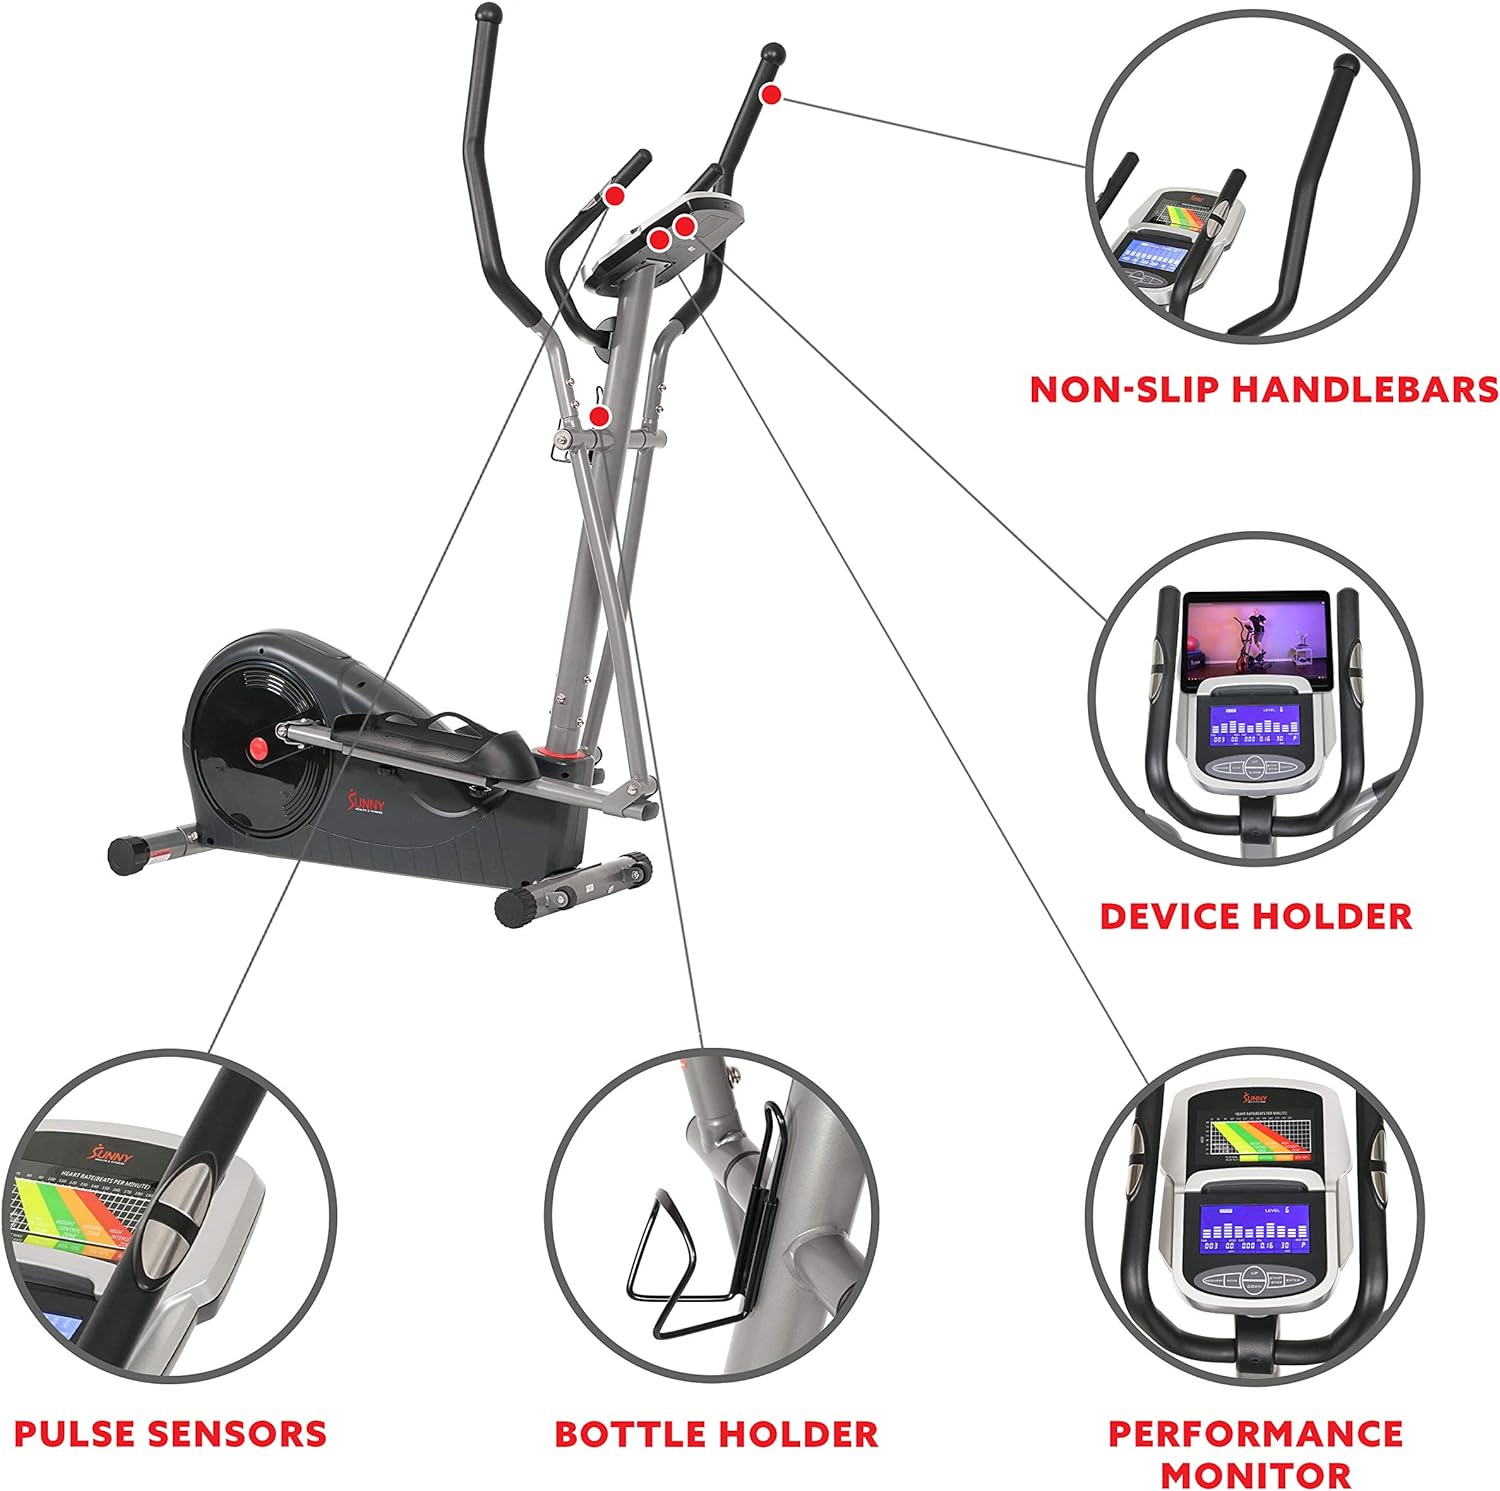 Sunny Health & Fitness Magnetic Elliptical Trainer Machine w/Device Holder, Programmable Monitor and Heart Rate Monitoring,